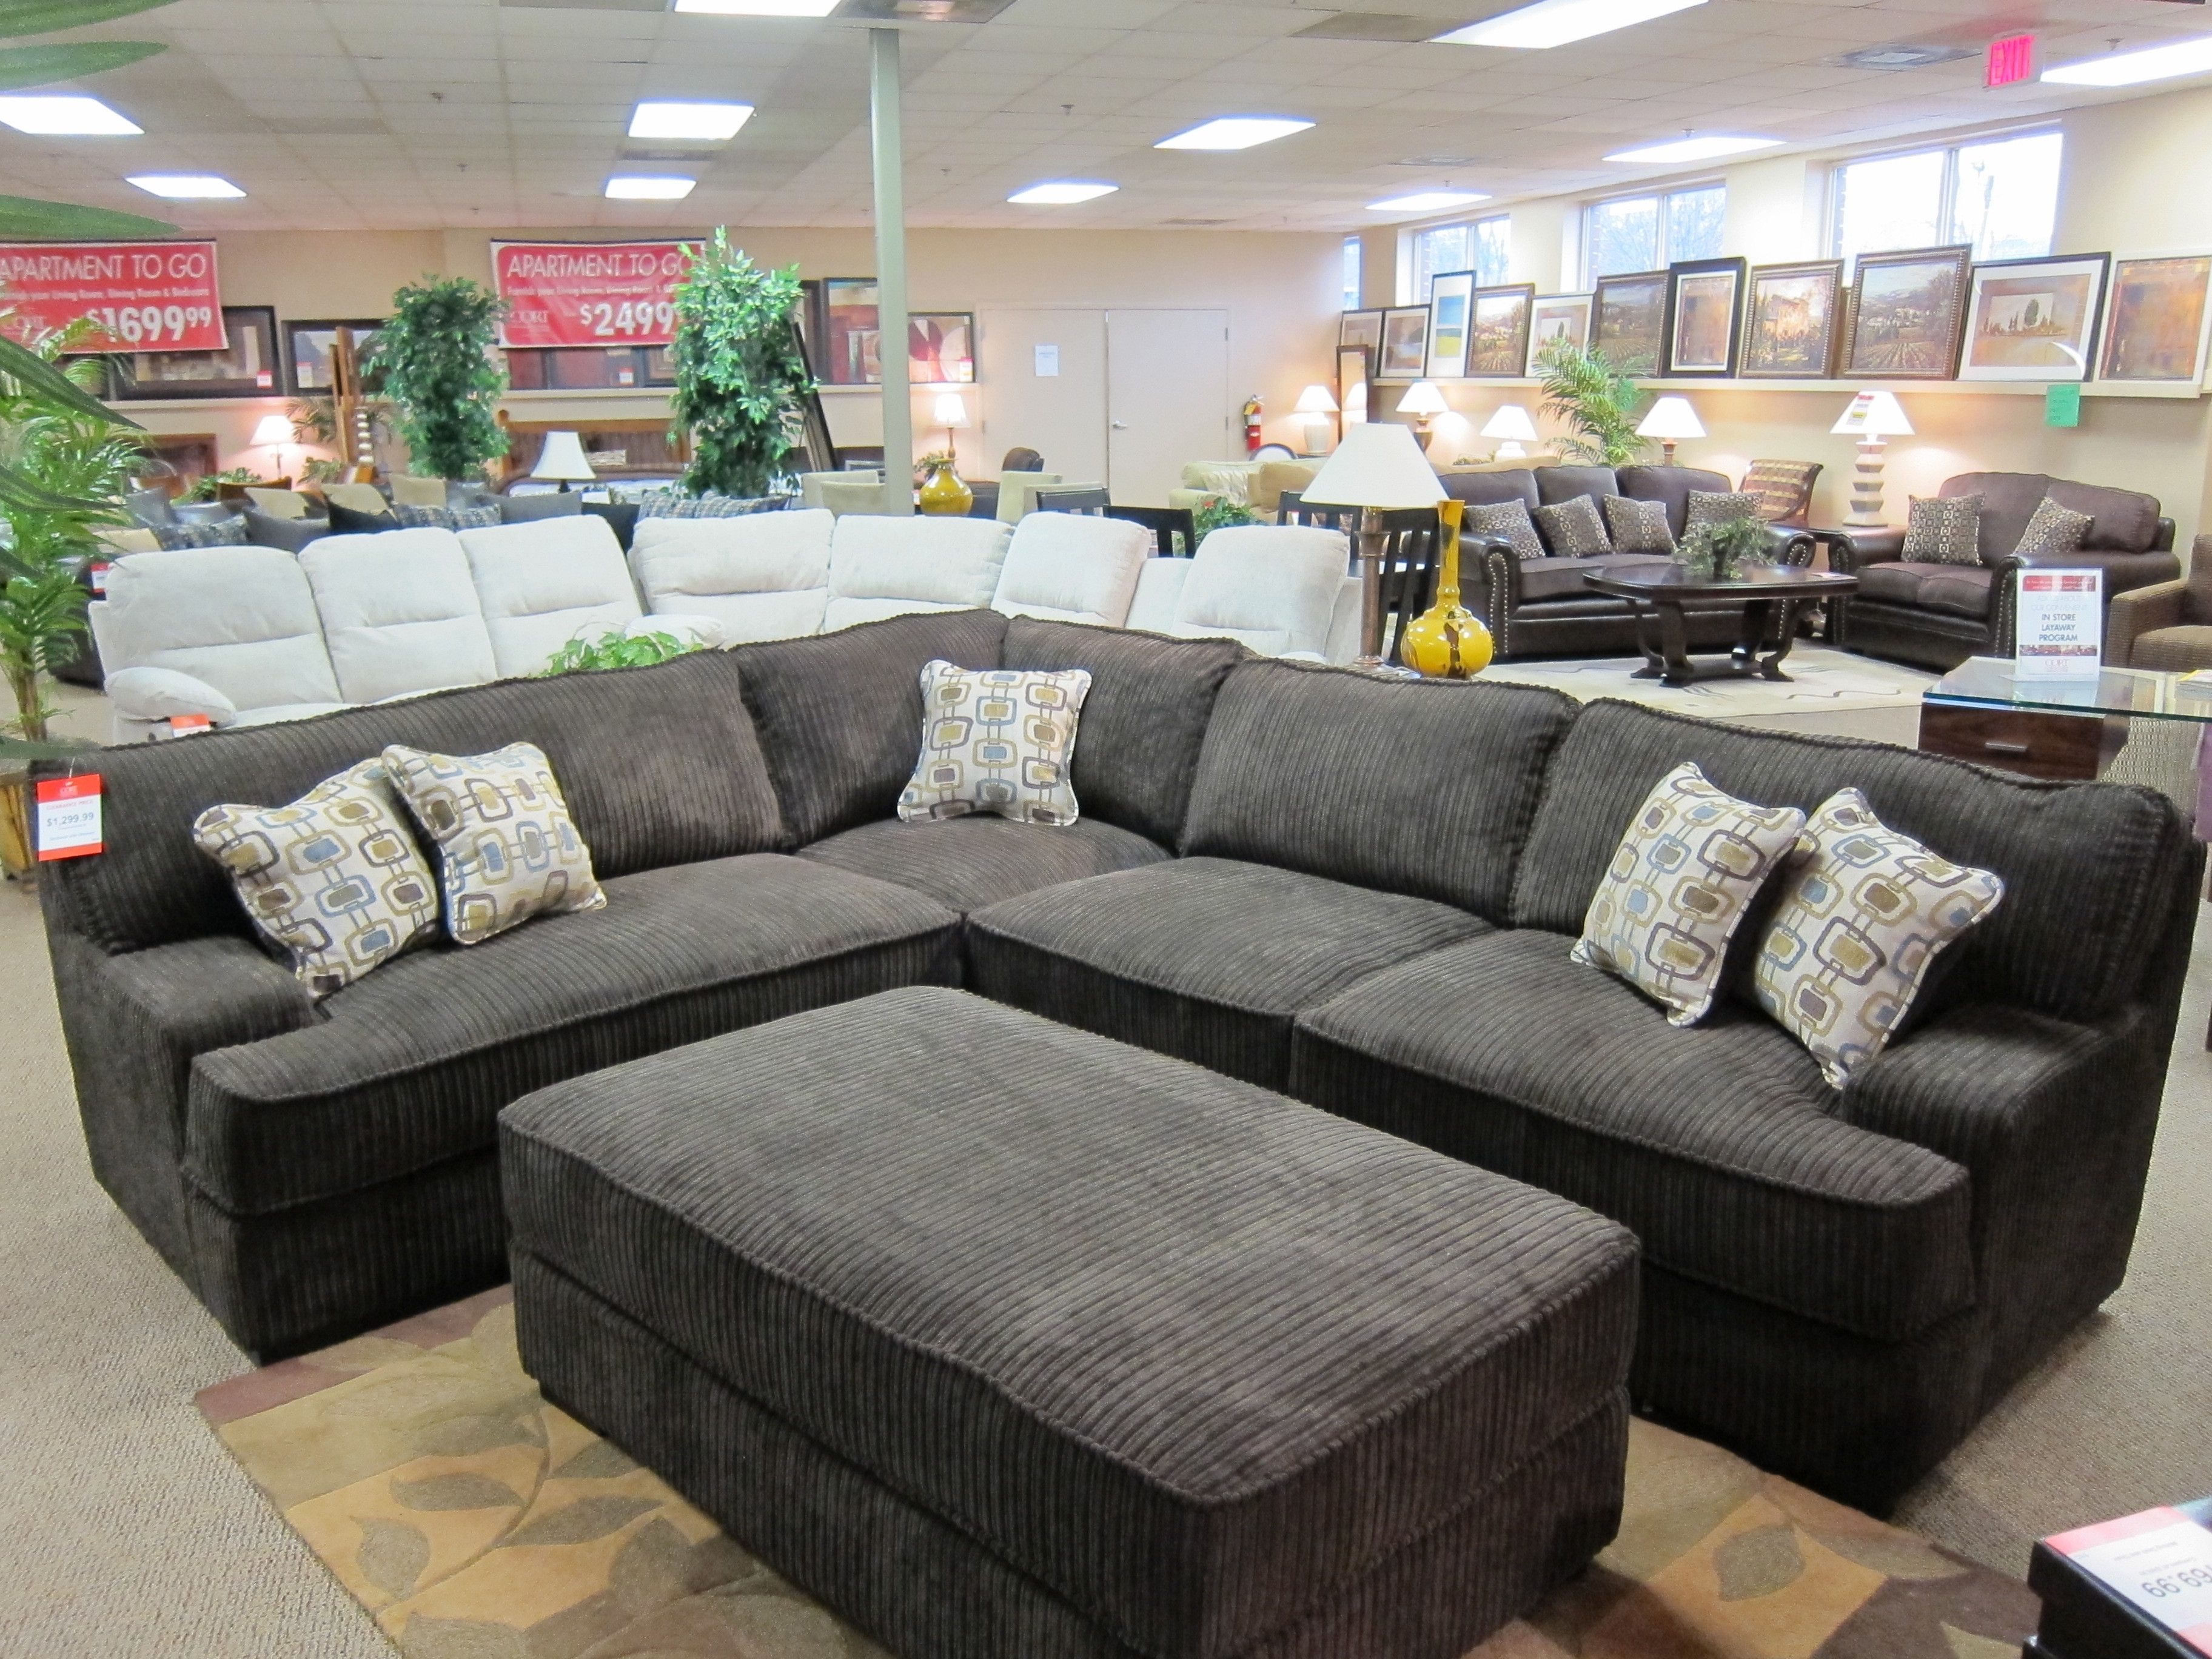 High Tech Wayfair Sectionals Sofas Oversized That Are Ready For For Sectional Sofas With Oversized Ottoman (View 8 of 15)